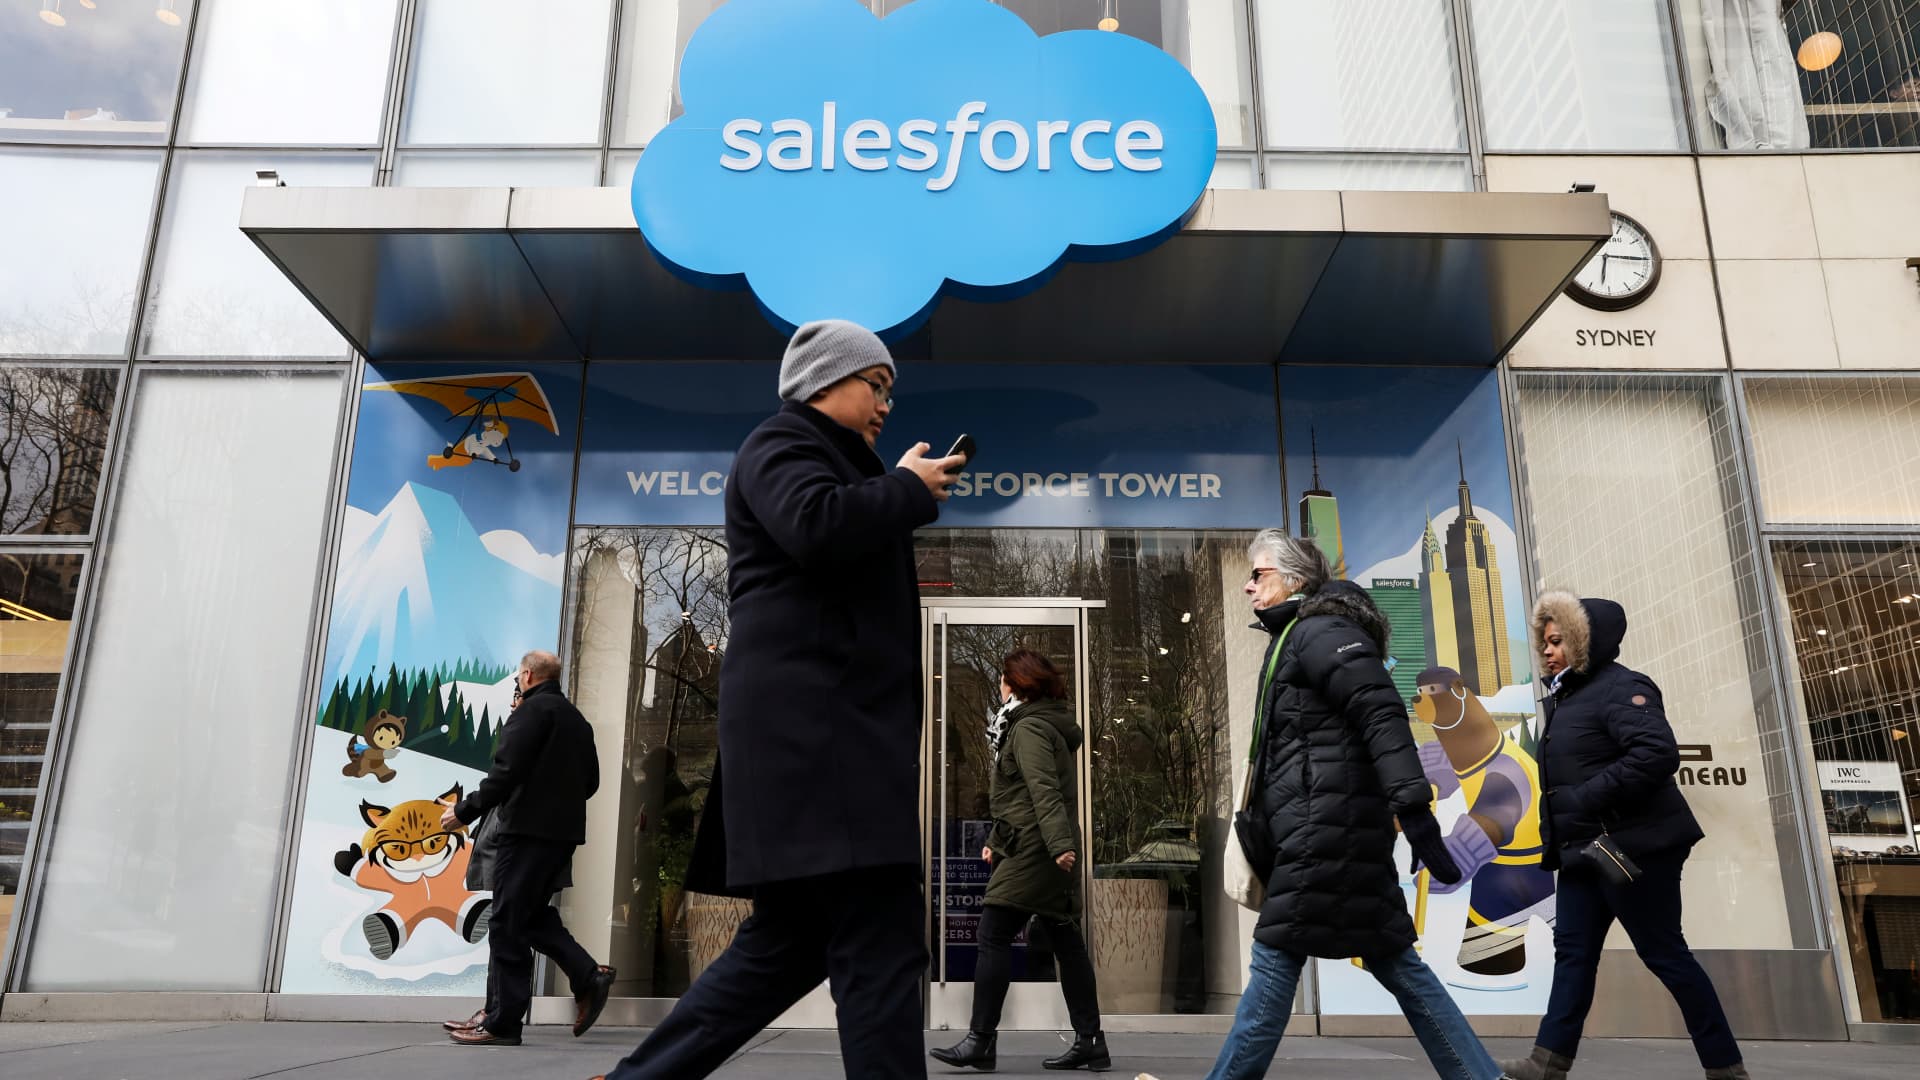 Salesforce drops after reports it is in talks to acquire Informatica